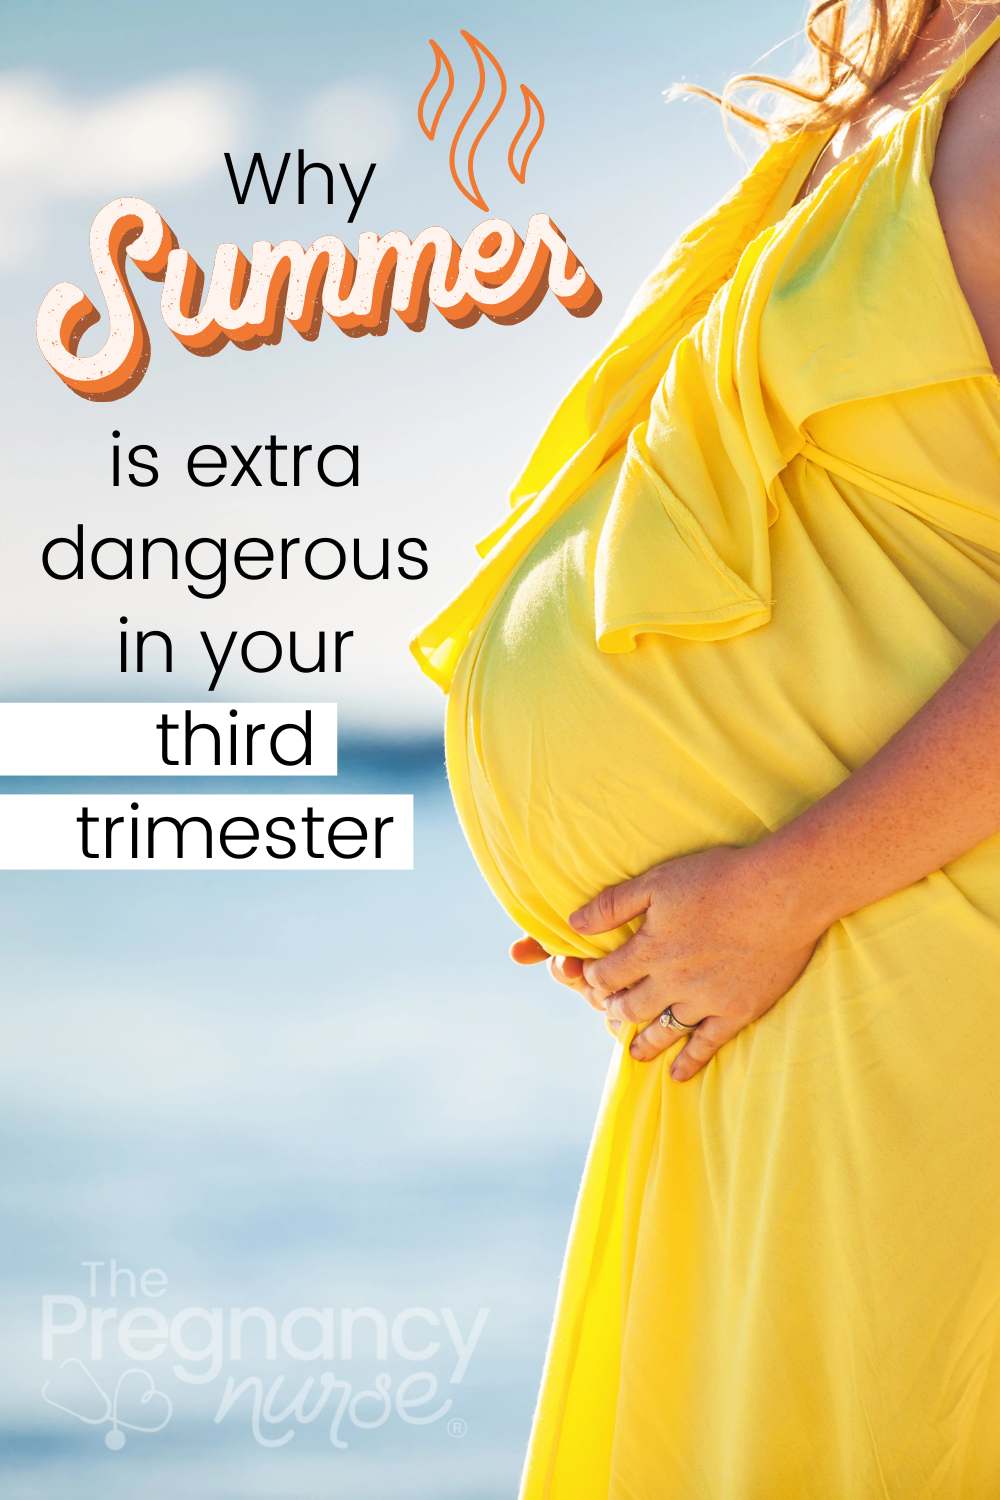 Being pregnant in the heat of summer can be challenging. However, there are ways to keep cool and ensure your baby's health. Get the facts on why summer affects your pregnancy and what you can do about it. Hint: hydration plays a huge role!